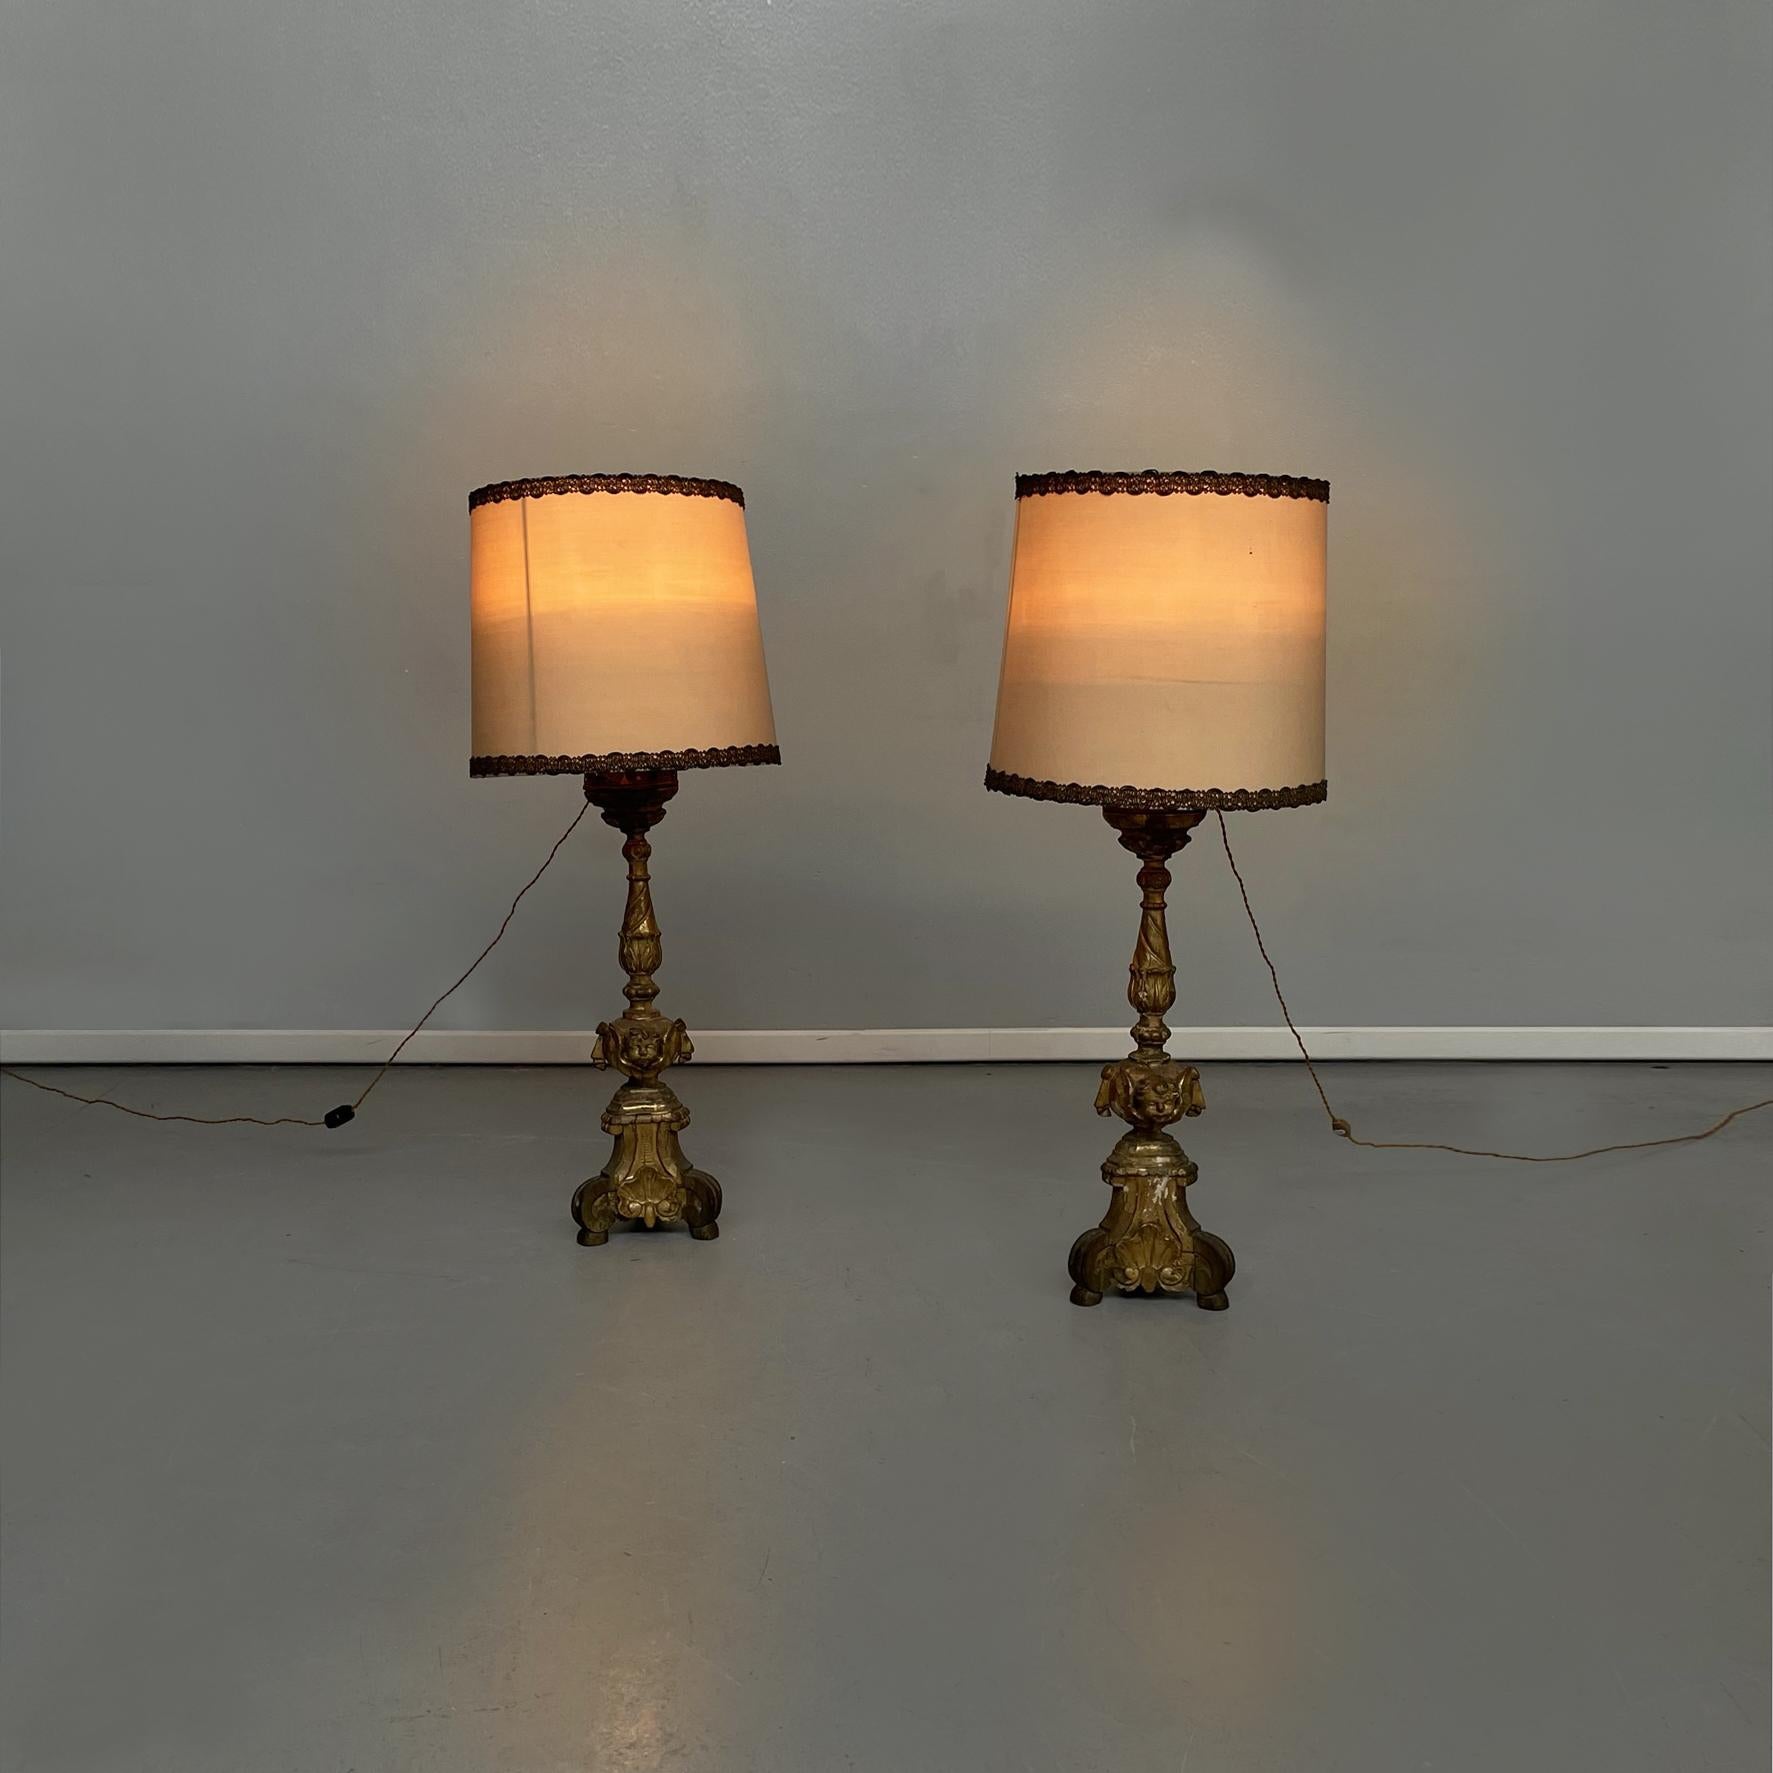 Italian antique Candelabra lamps in gold painted wood and beige fabric, 1800s
Pair of candelabra lamps in gold painted wood. The lampshade is in beige fabric with silver thread trimmings. The wooden structure is finely worked, with a putto face at